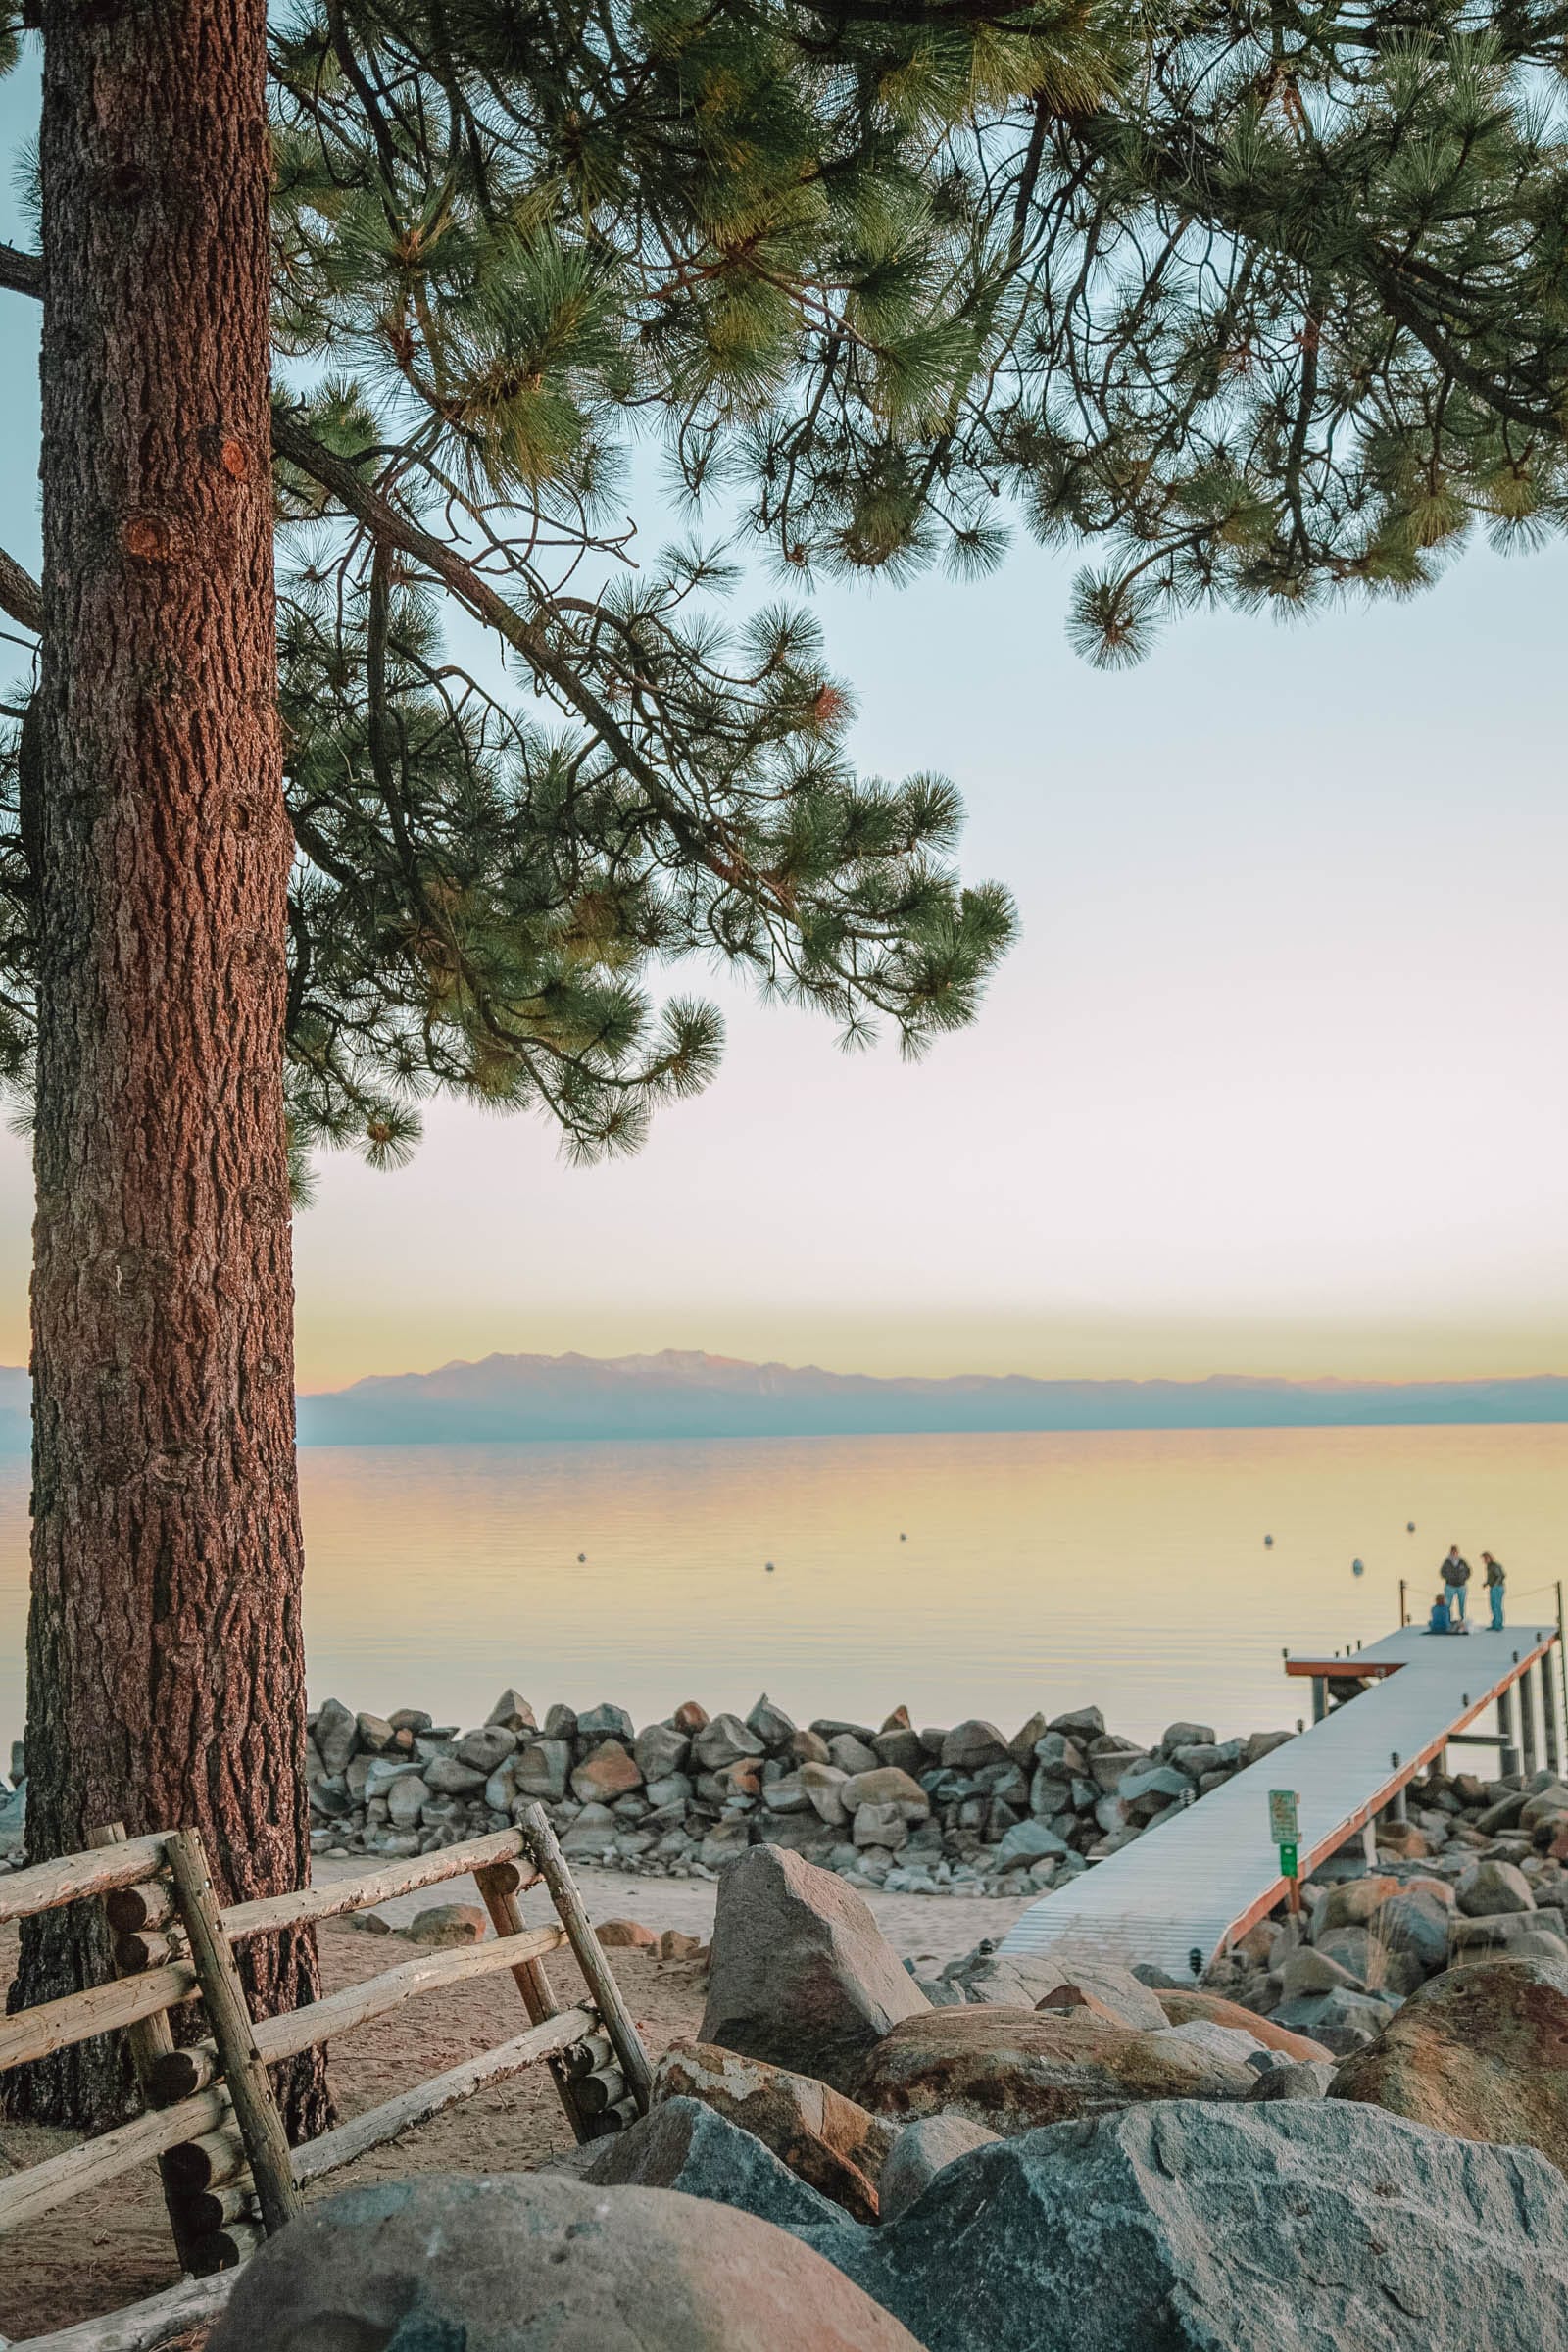 10 Very Best Things To Do In Lake Tahoe – Hand Luggage Only